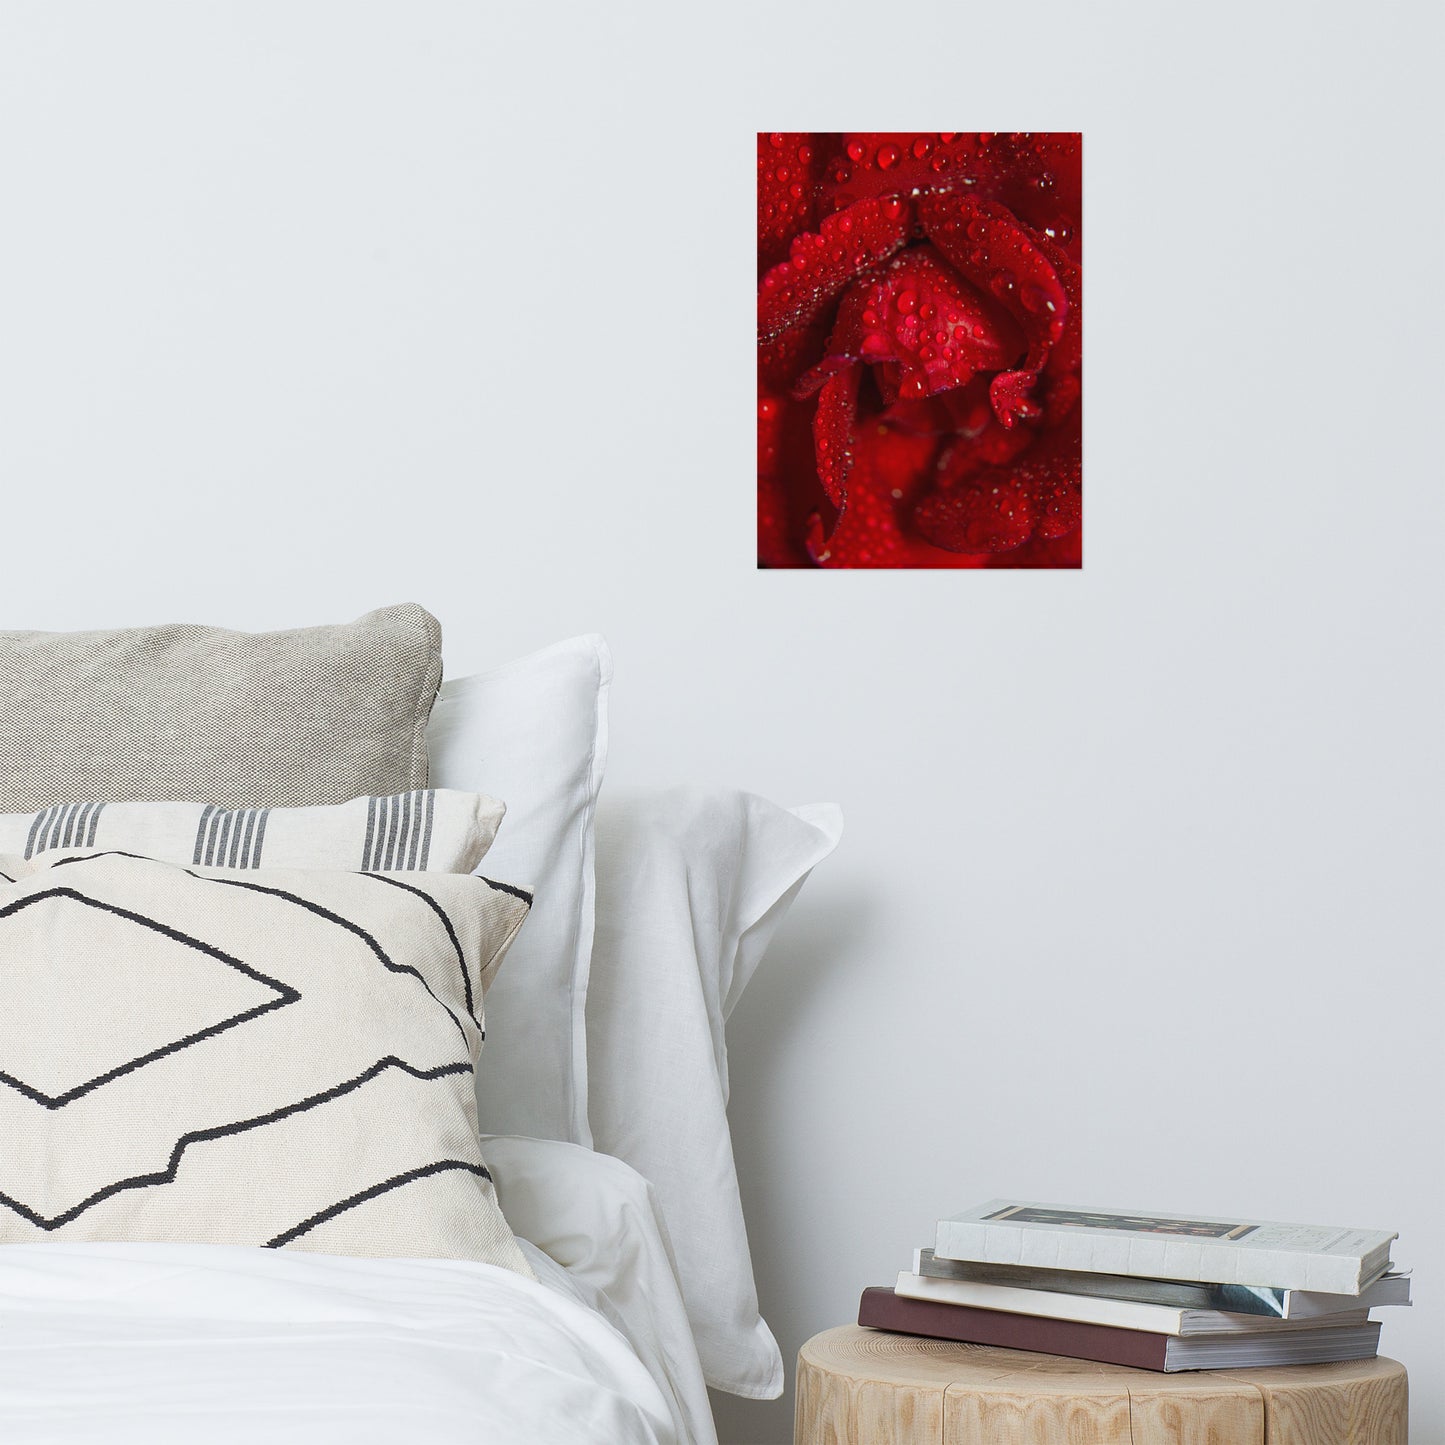 Royal Red Rose Floral Nature Photo Loose Unframed Wall Art Prints